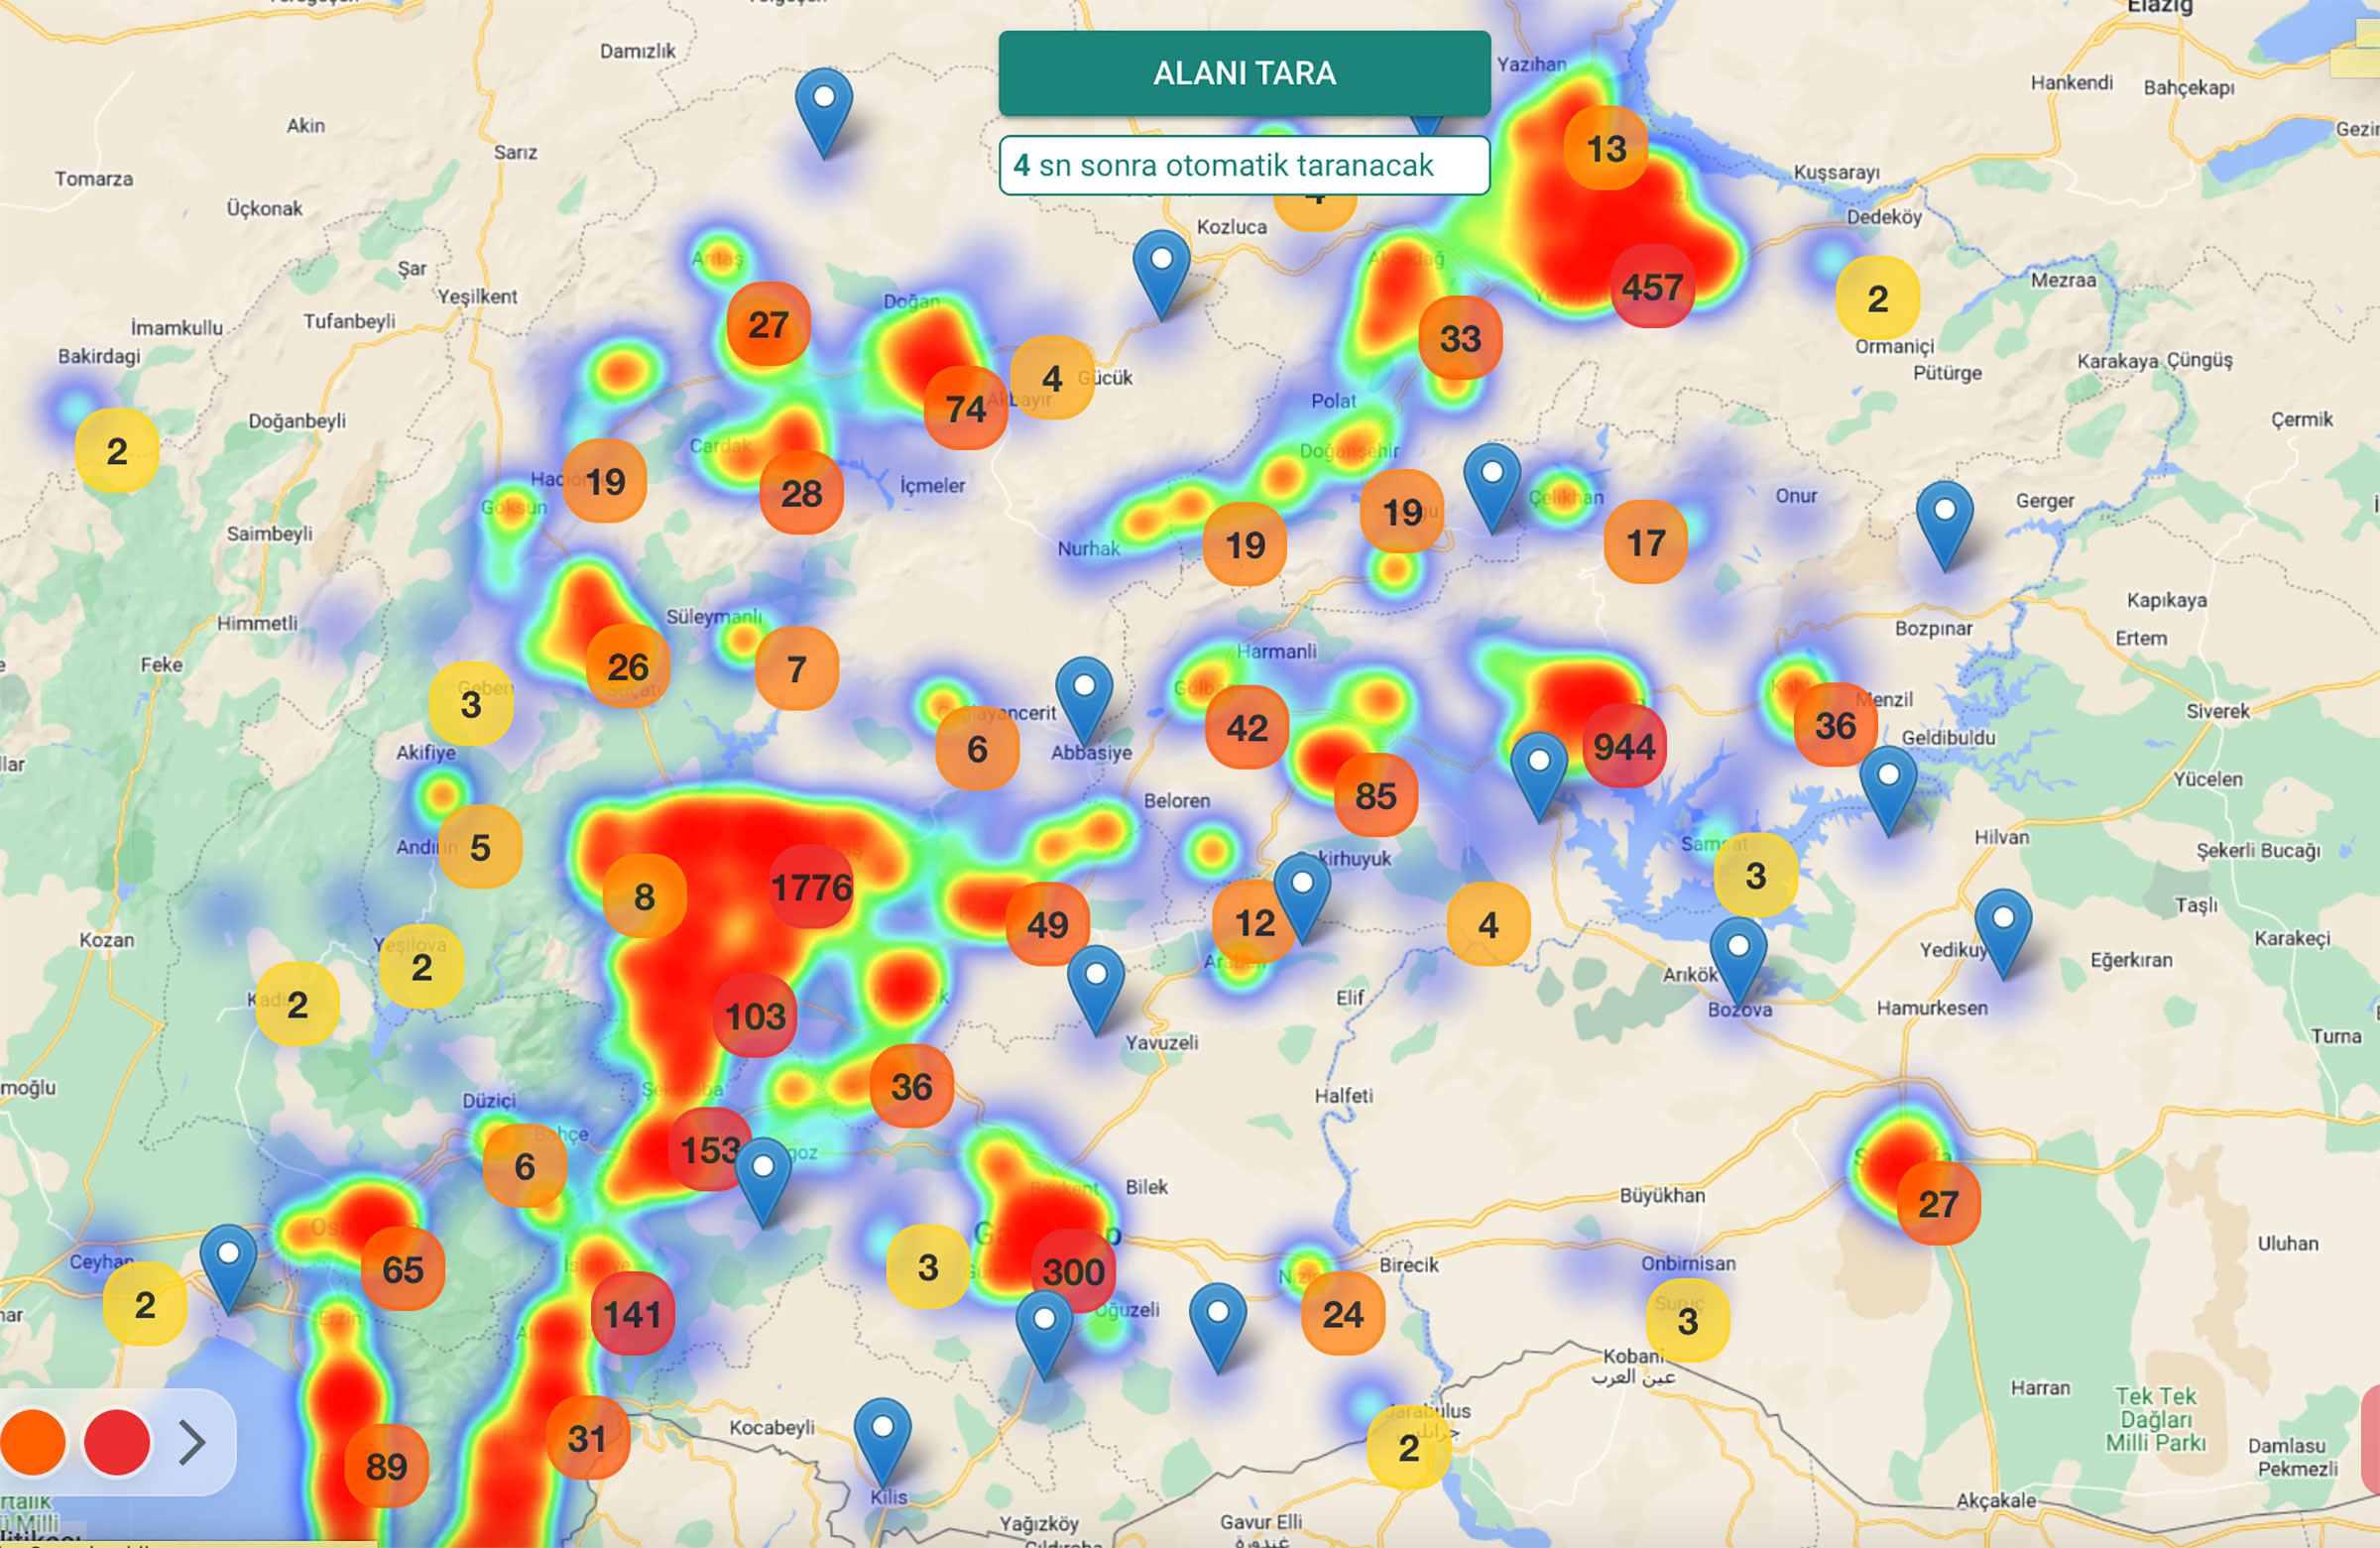 A heat map built from calls for help in areas struck by the earthquake in Turkey, scraped from social media data by the "Earthquake Help Project" (Earthquake Help Project)